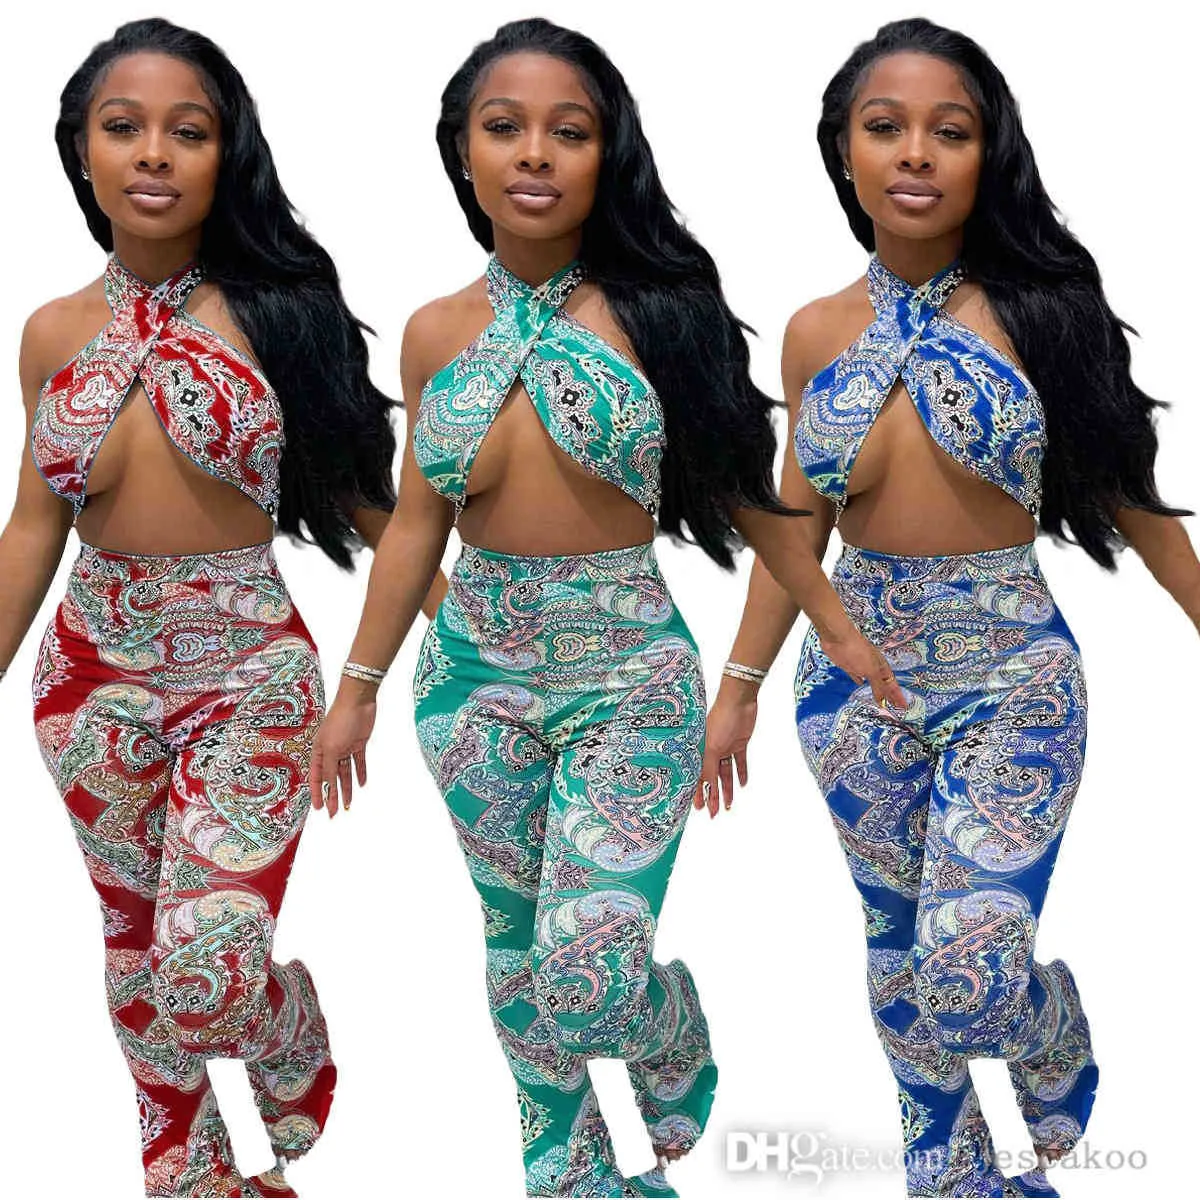 Women Tracksuits Two Piece Pants Sets Summer Clothing Printed Shorts + T-shirt Short Sleeve Crop Top Sexy Suits S-XXL